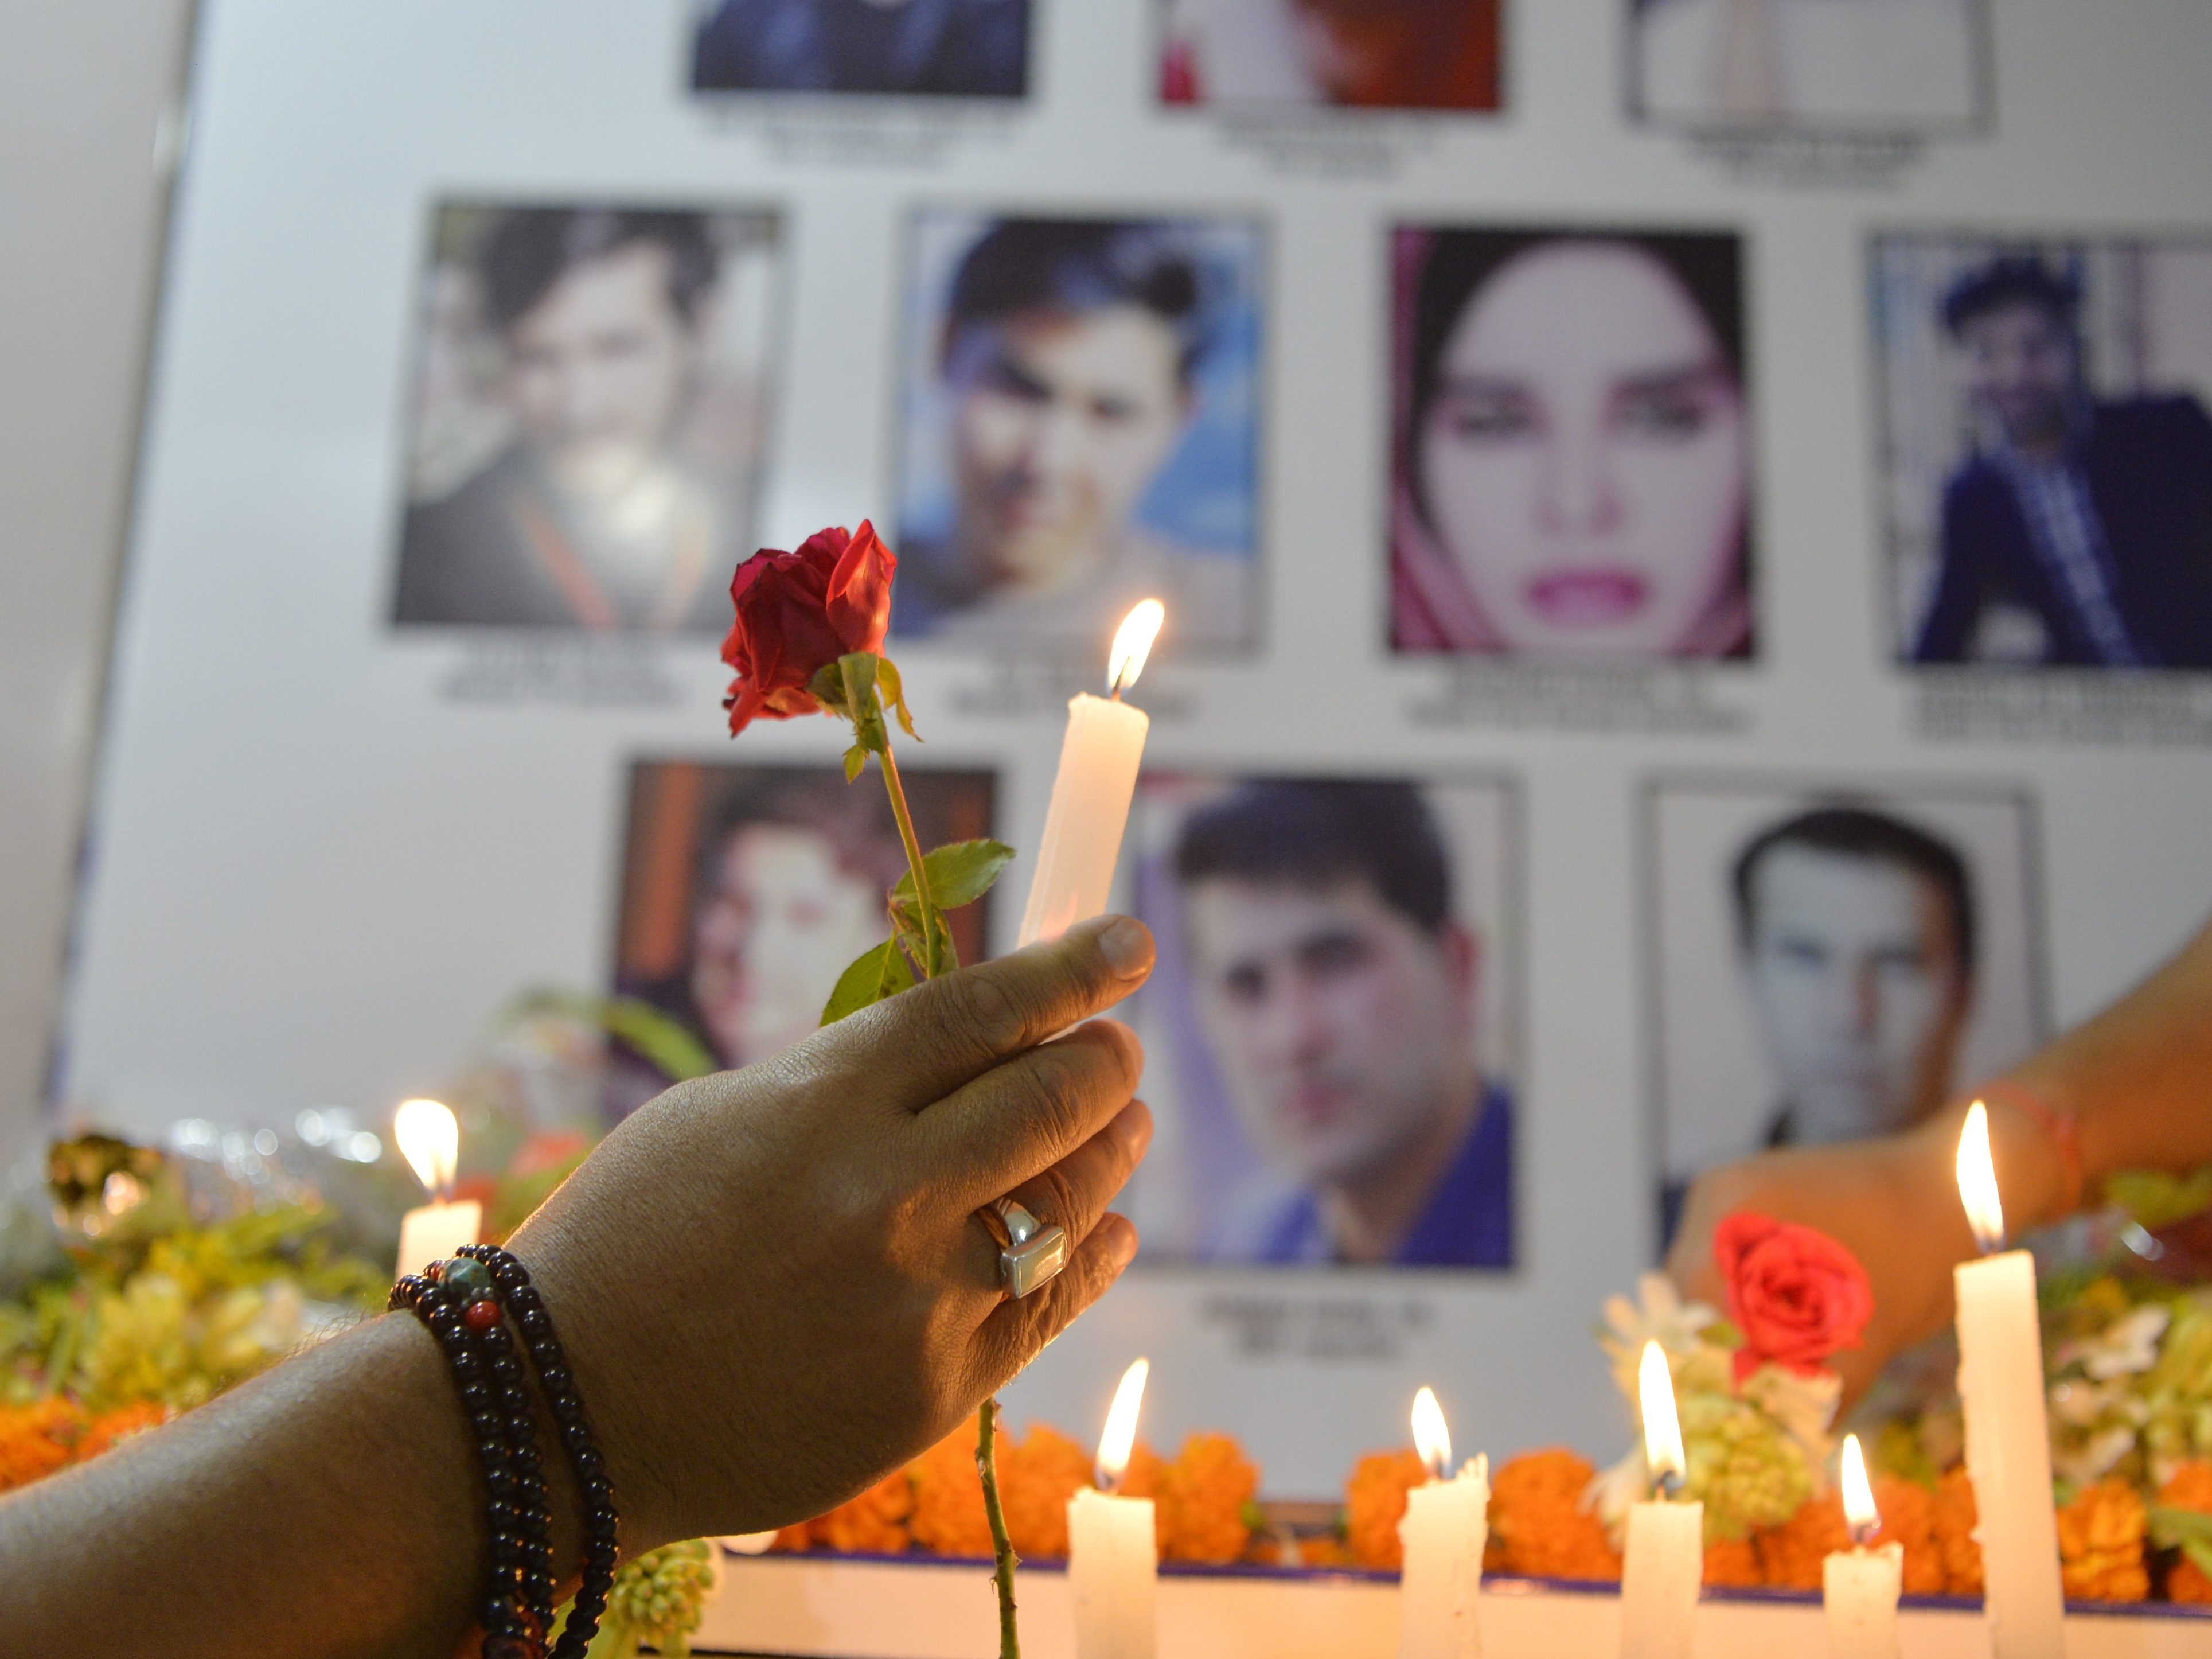 Journalists light candles in Siliguri, India, on May 3, during a vigil for Afghan journalists who were killed in a targeted suicide bombing in Kabul on April 30.